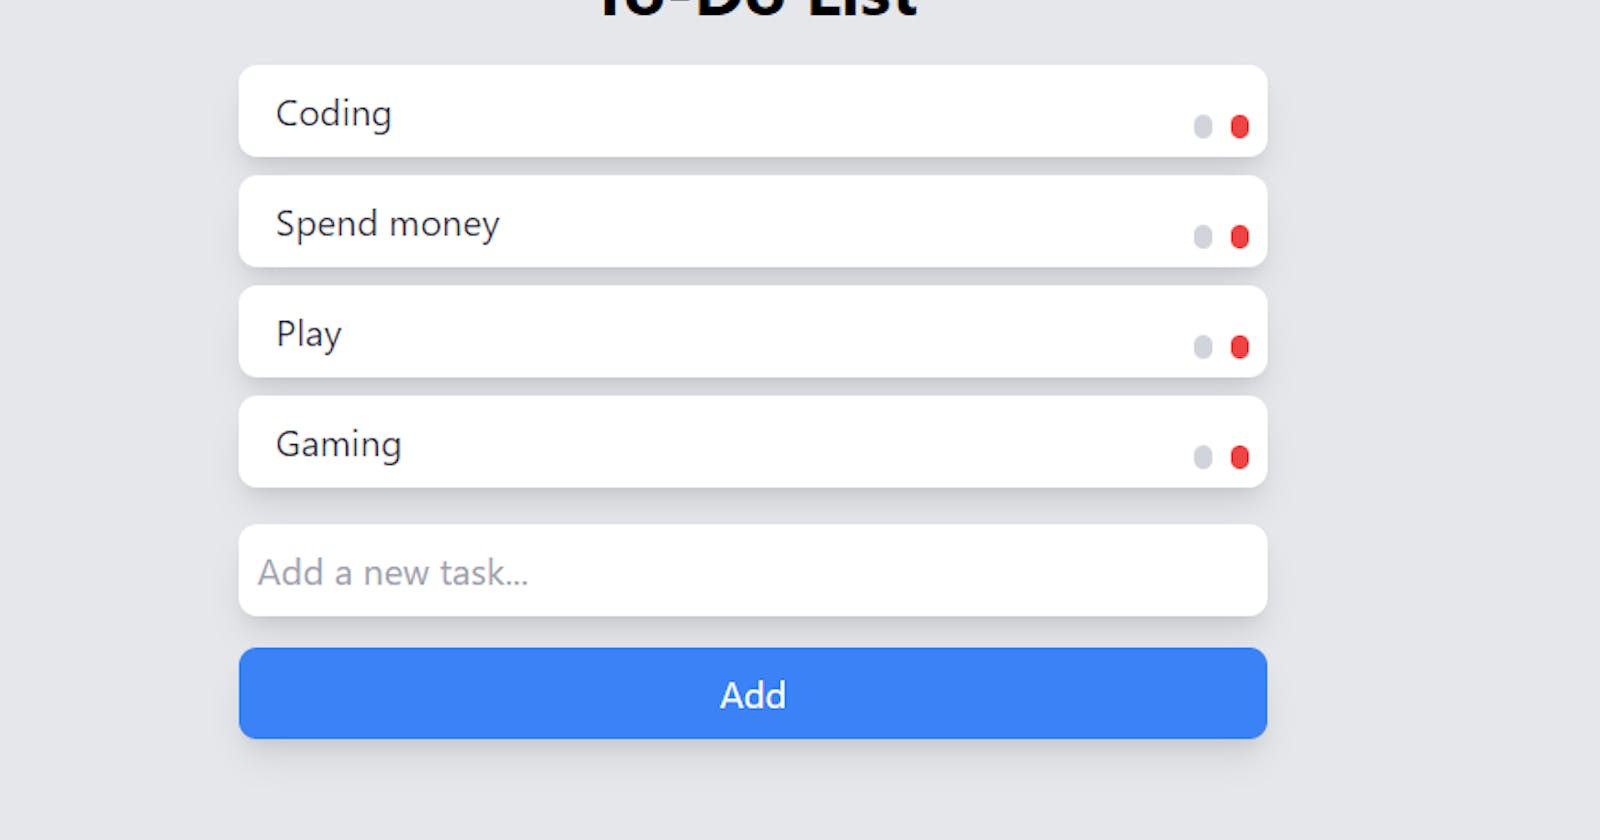 To-Do List Application with Tailwind CSS, and JavaScript